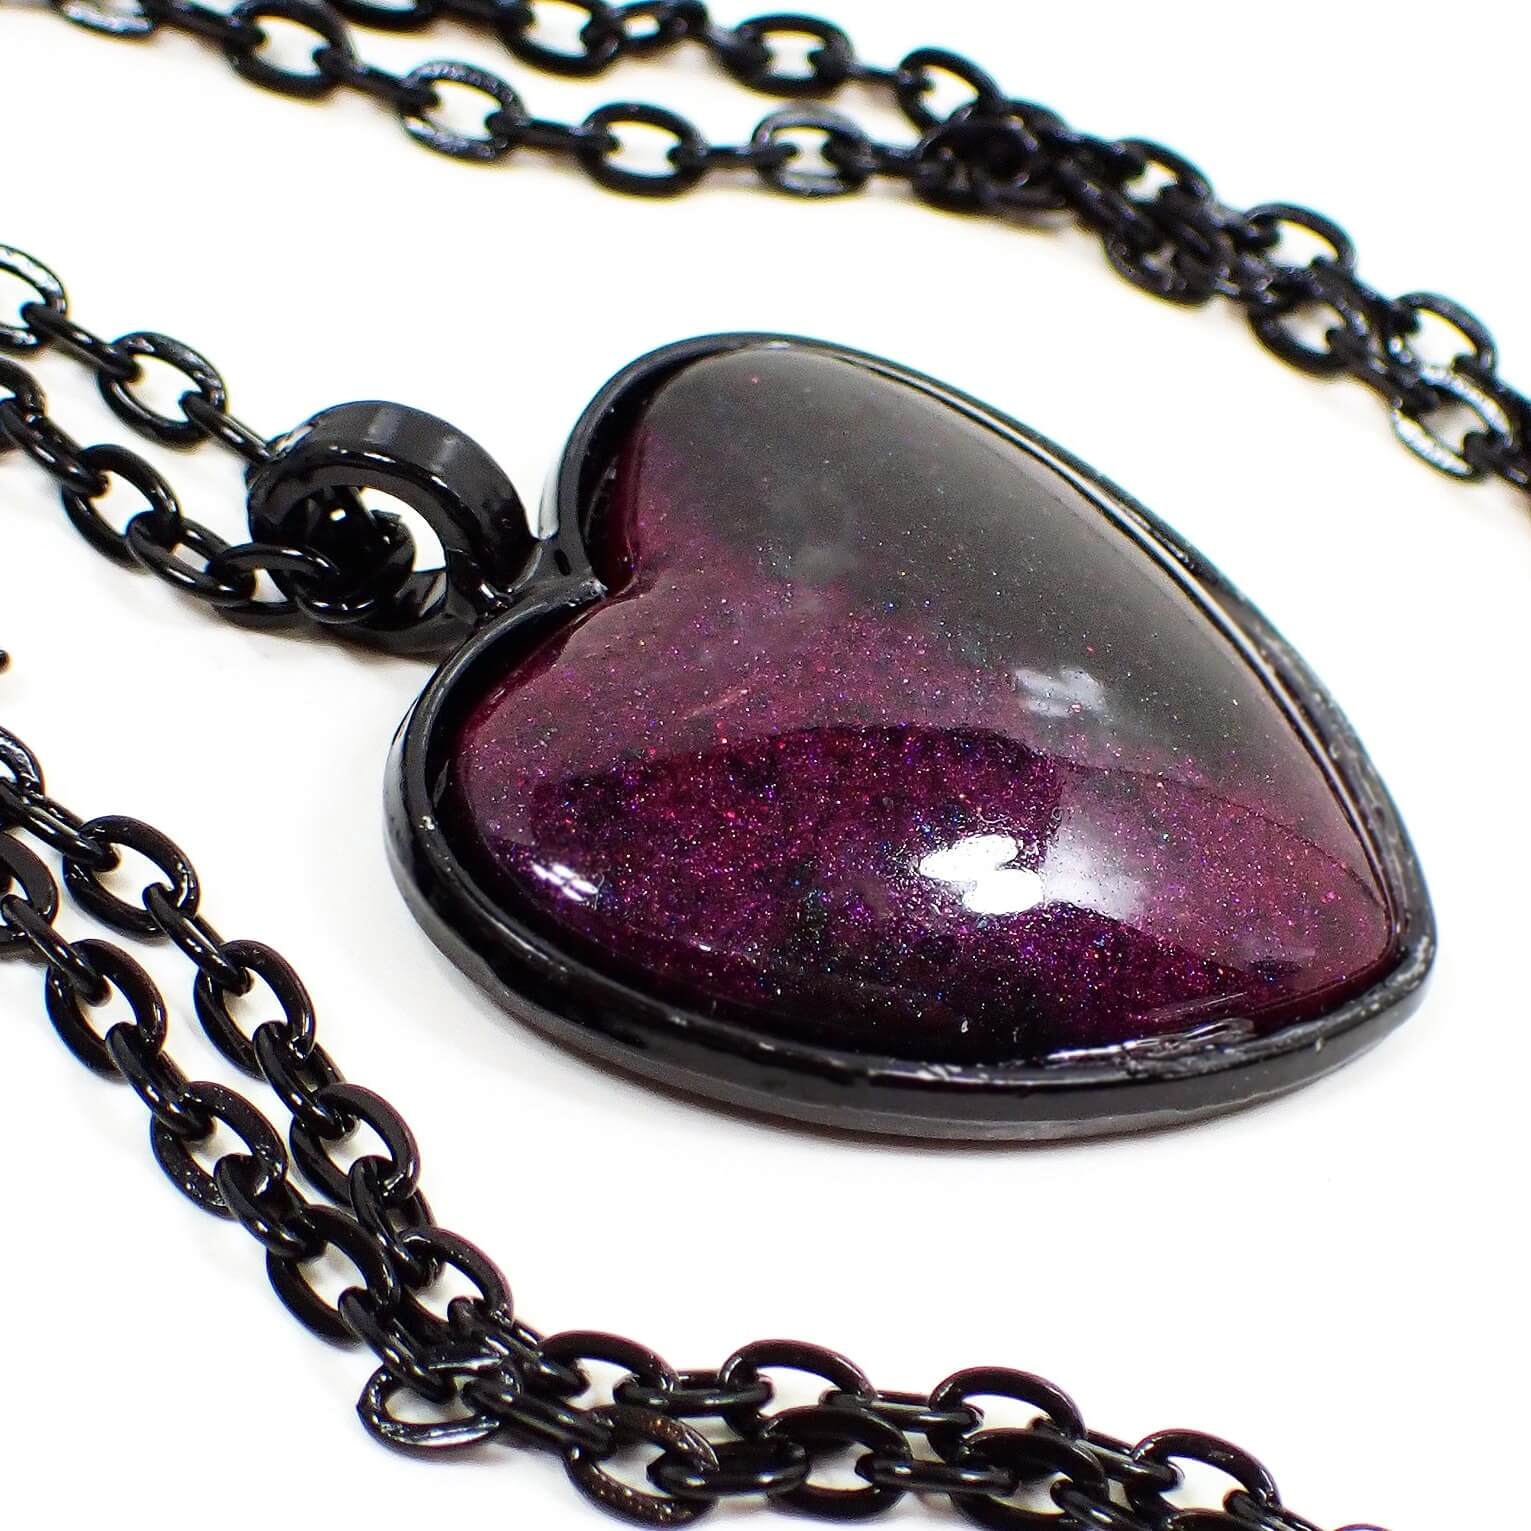 Enlarged front view of the handmade resin Goth heart pendant necklace. The chain and setting are black in color. The heart has a domed resin front with pearly dark pink and black resin. Some areas of the pink have hints of purple color depending on how the light hits it.